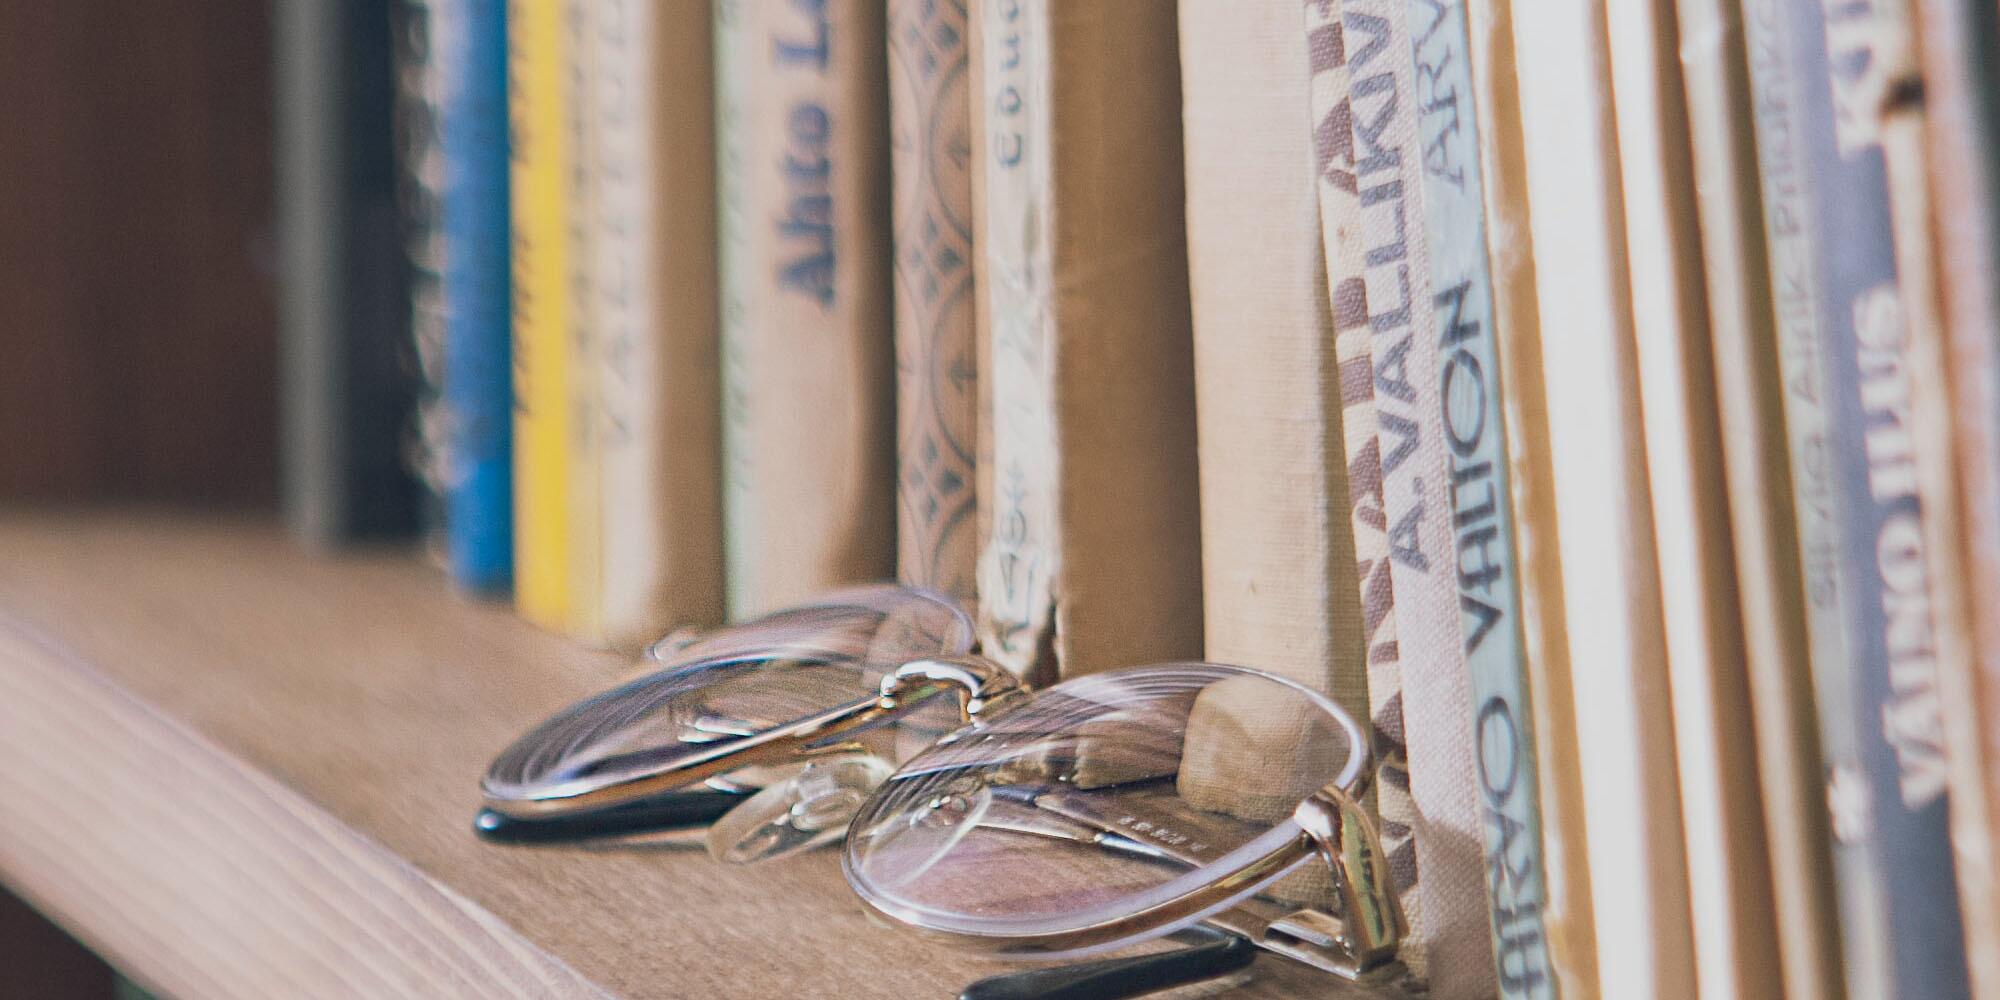 books on a shelf with folded glasses sitting in front of them